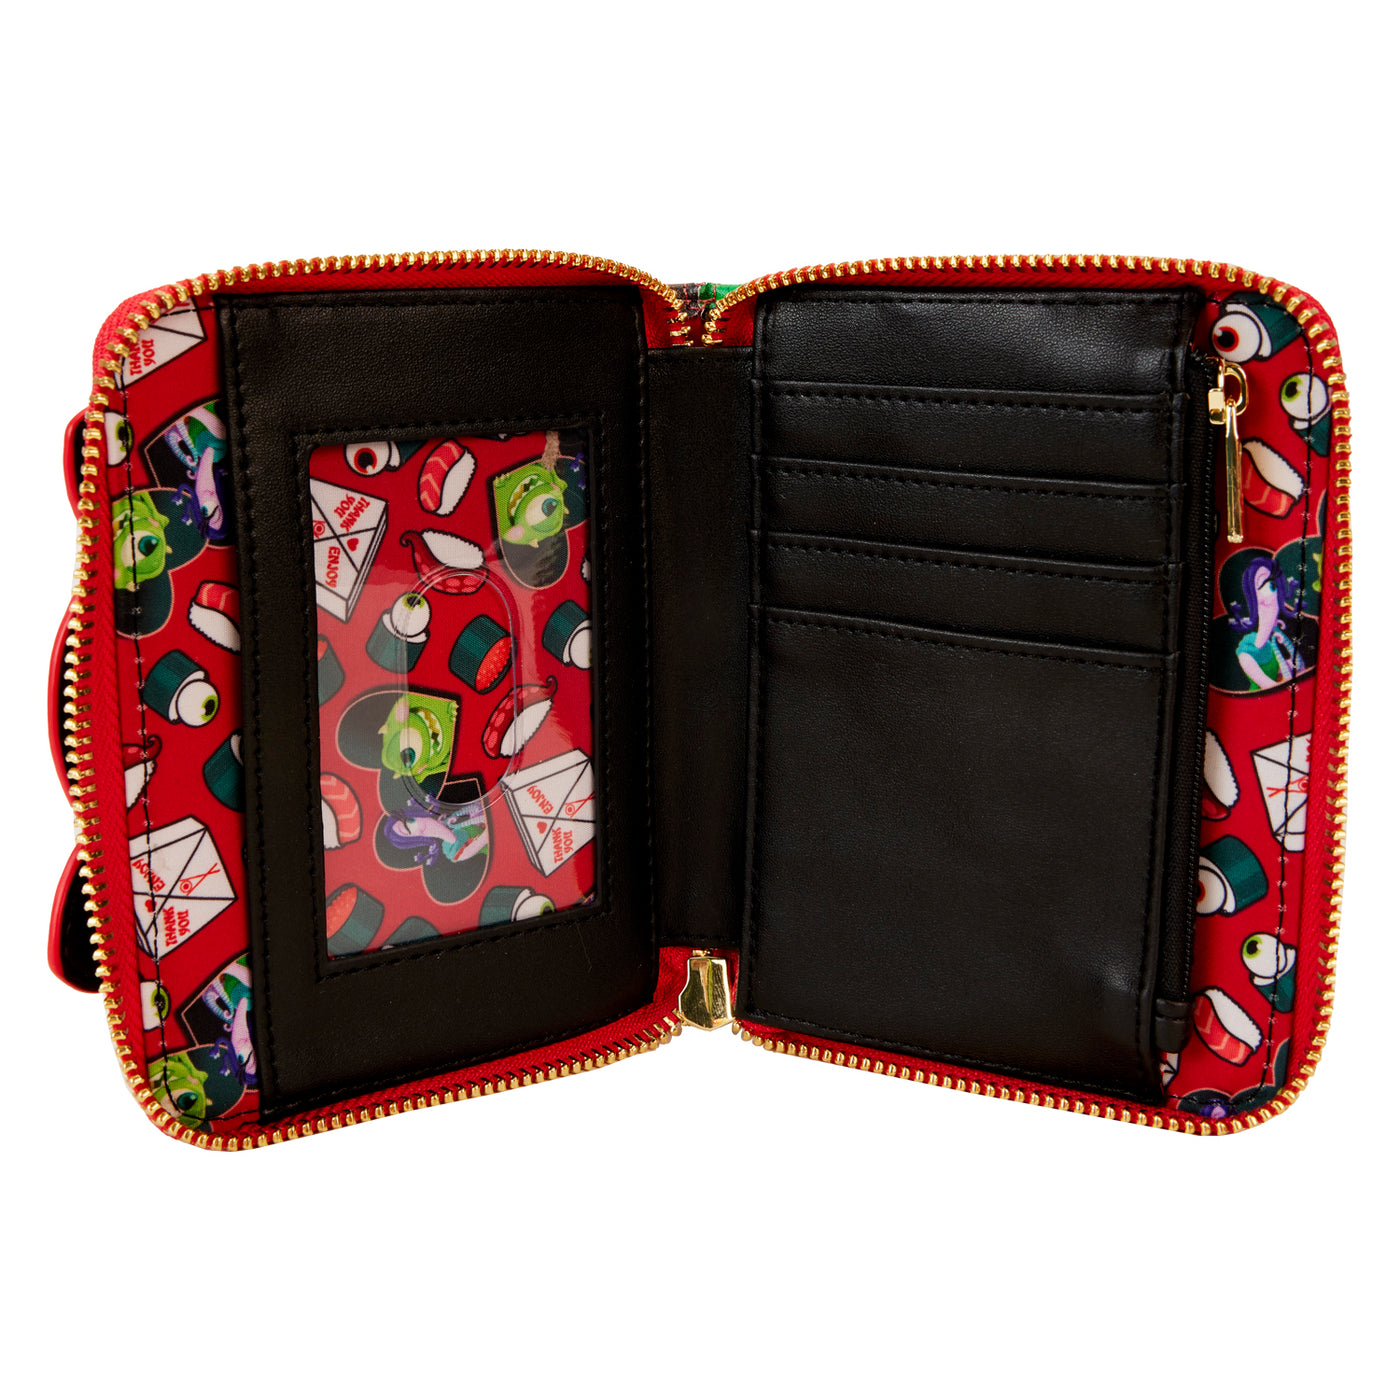 Disney Pixar Monsters Inc. Boo Takeout Wallet